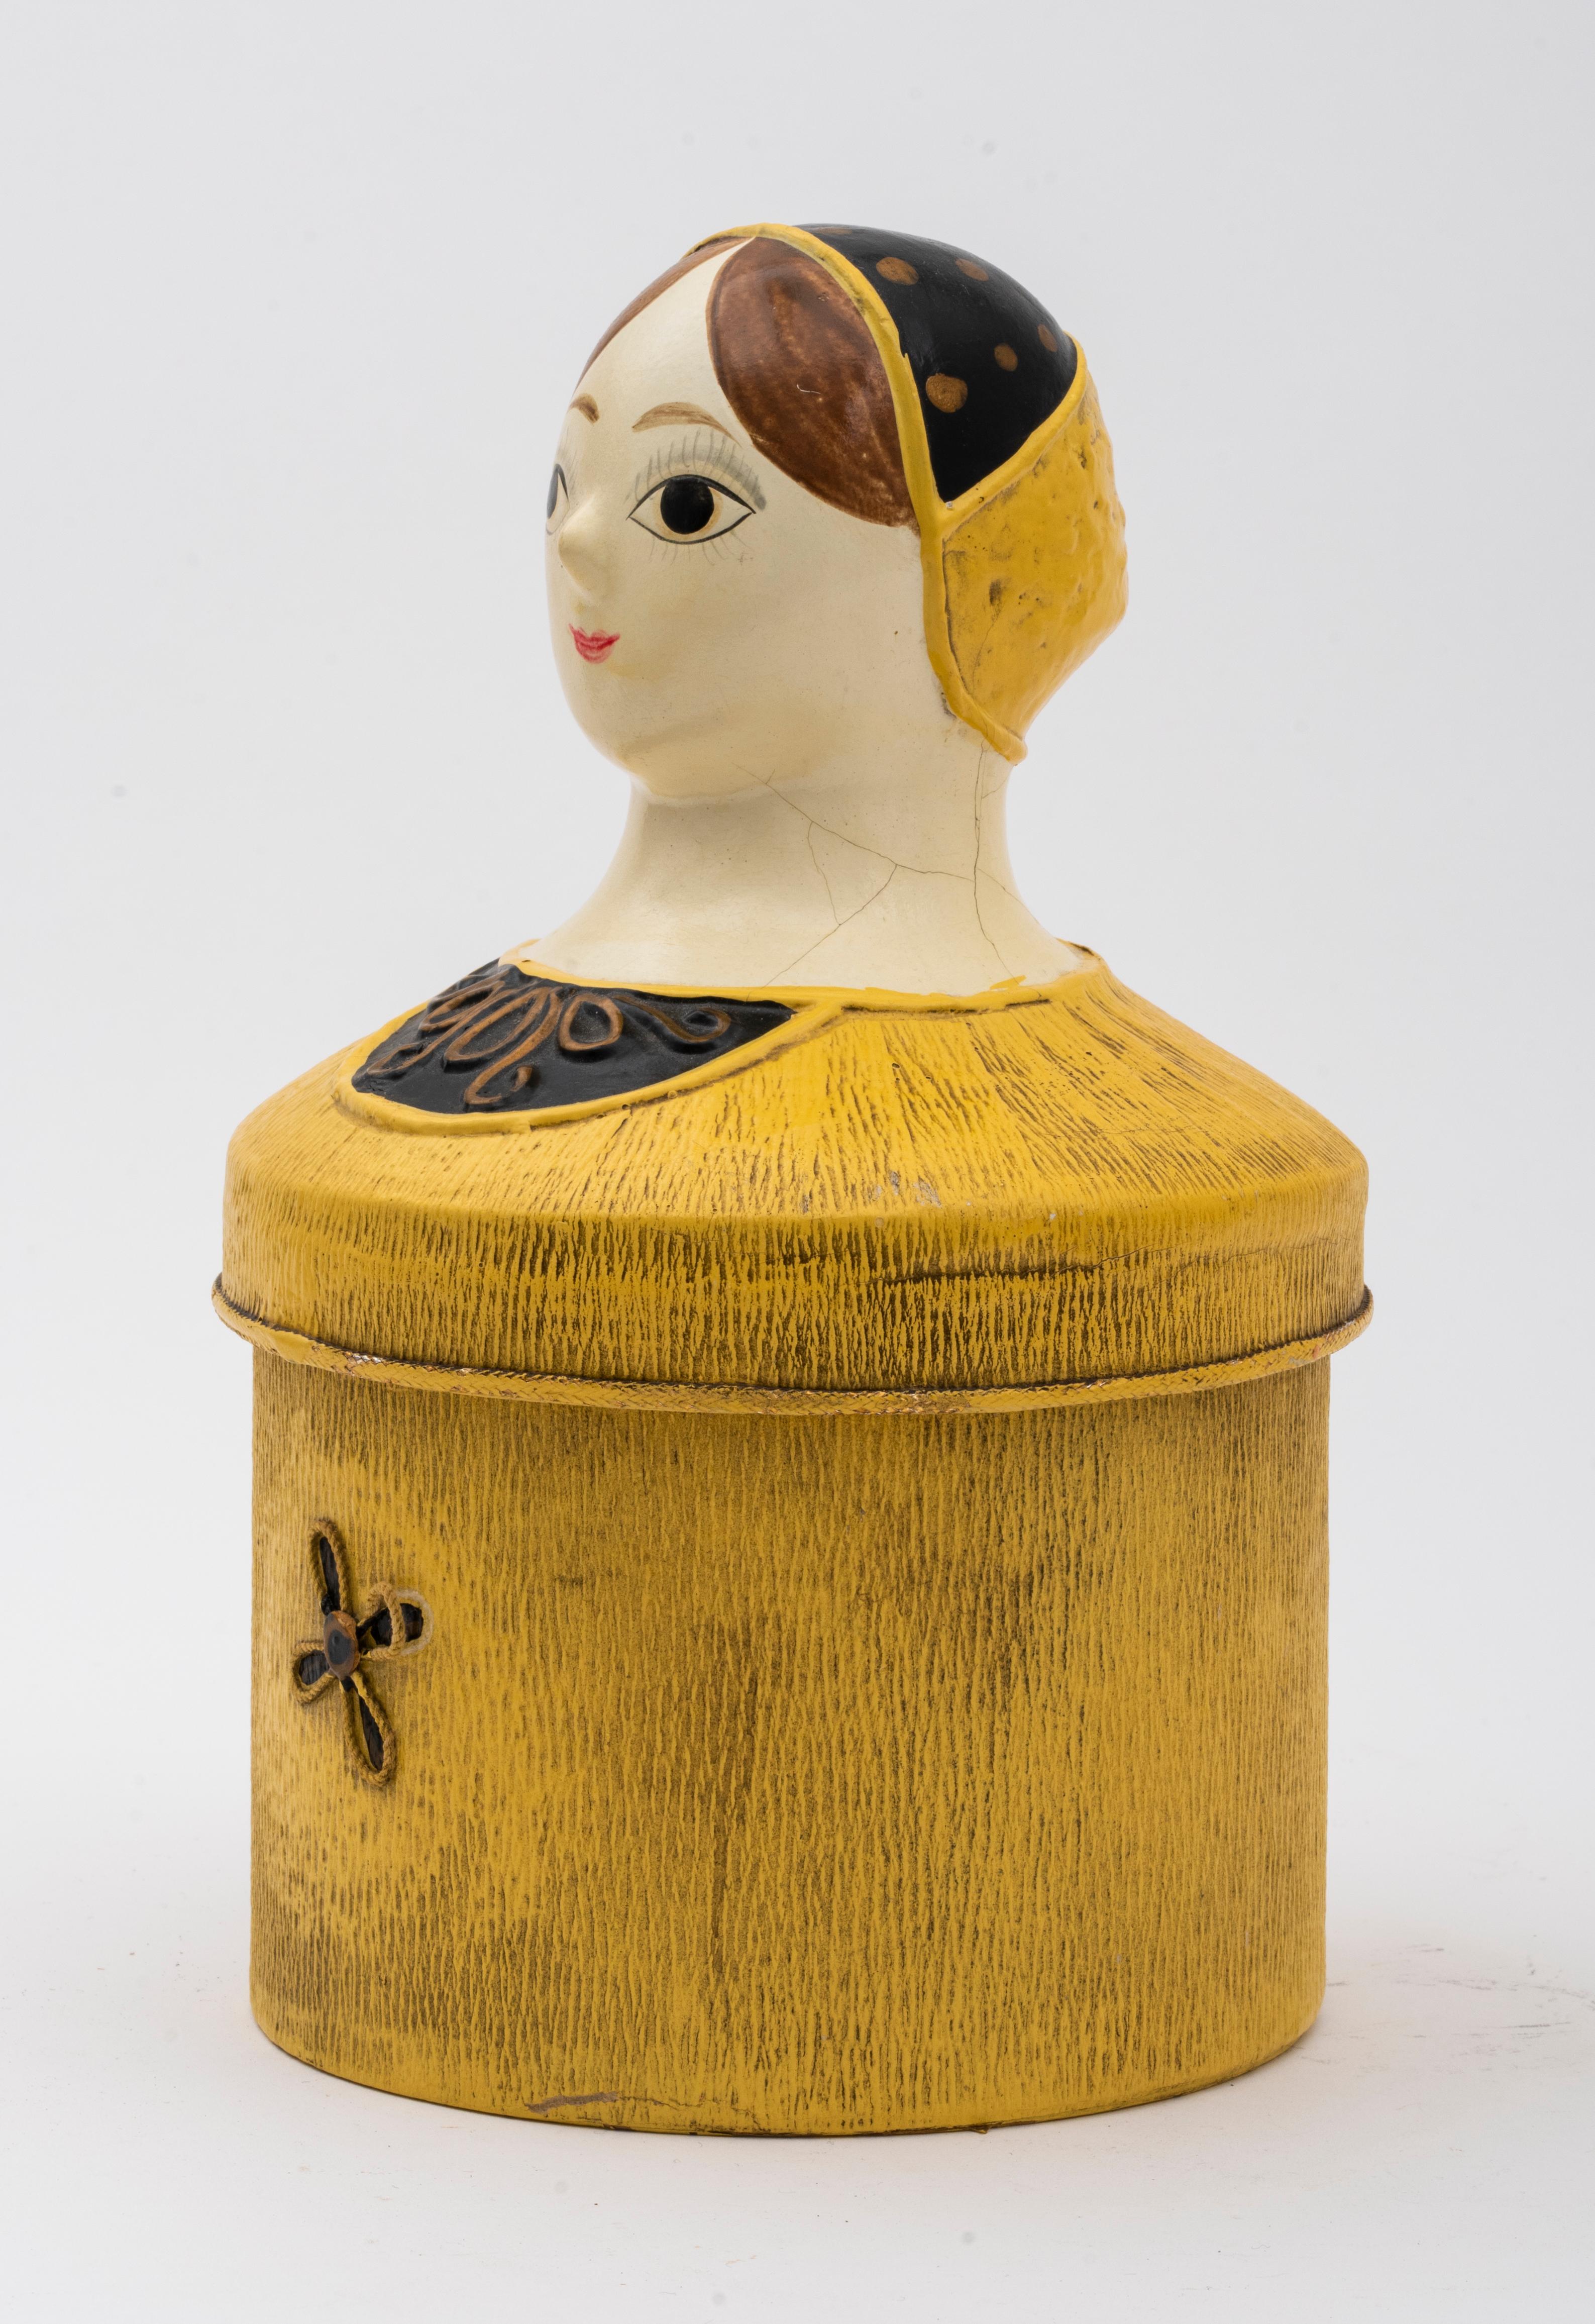 Vintage Paper Mache doll decorative box, made by I.W. Rice & Co., made in Japan. Measures: 9